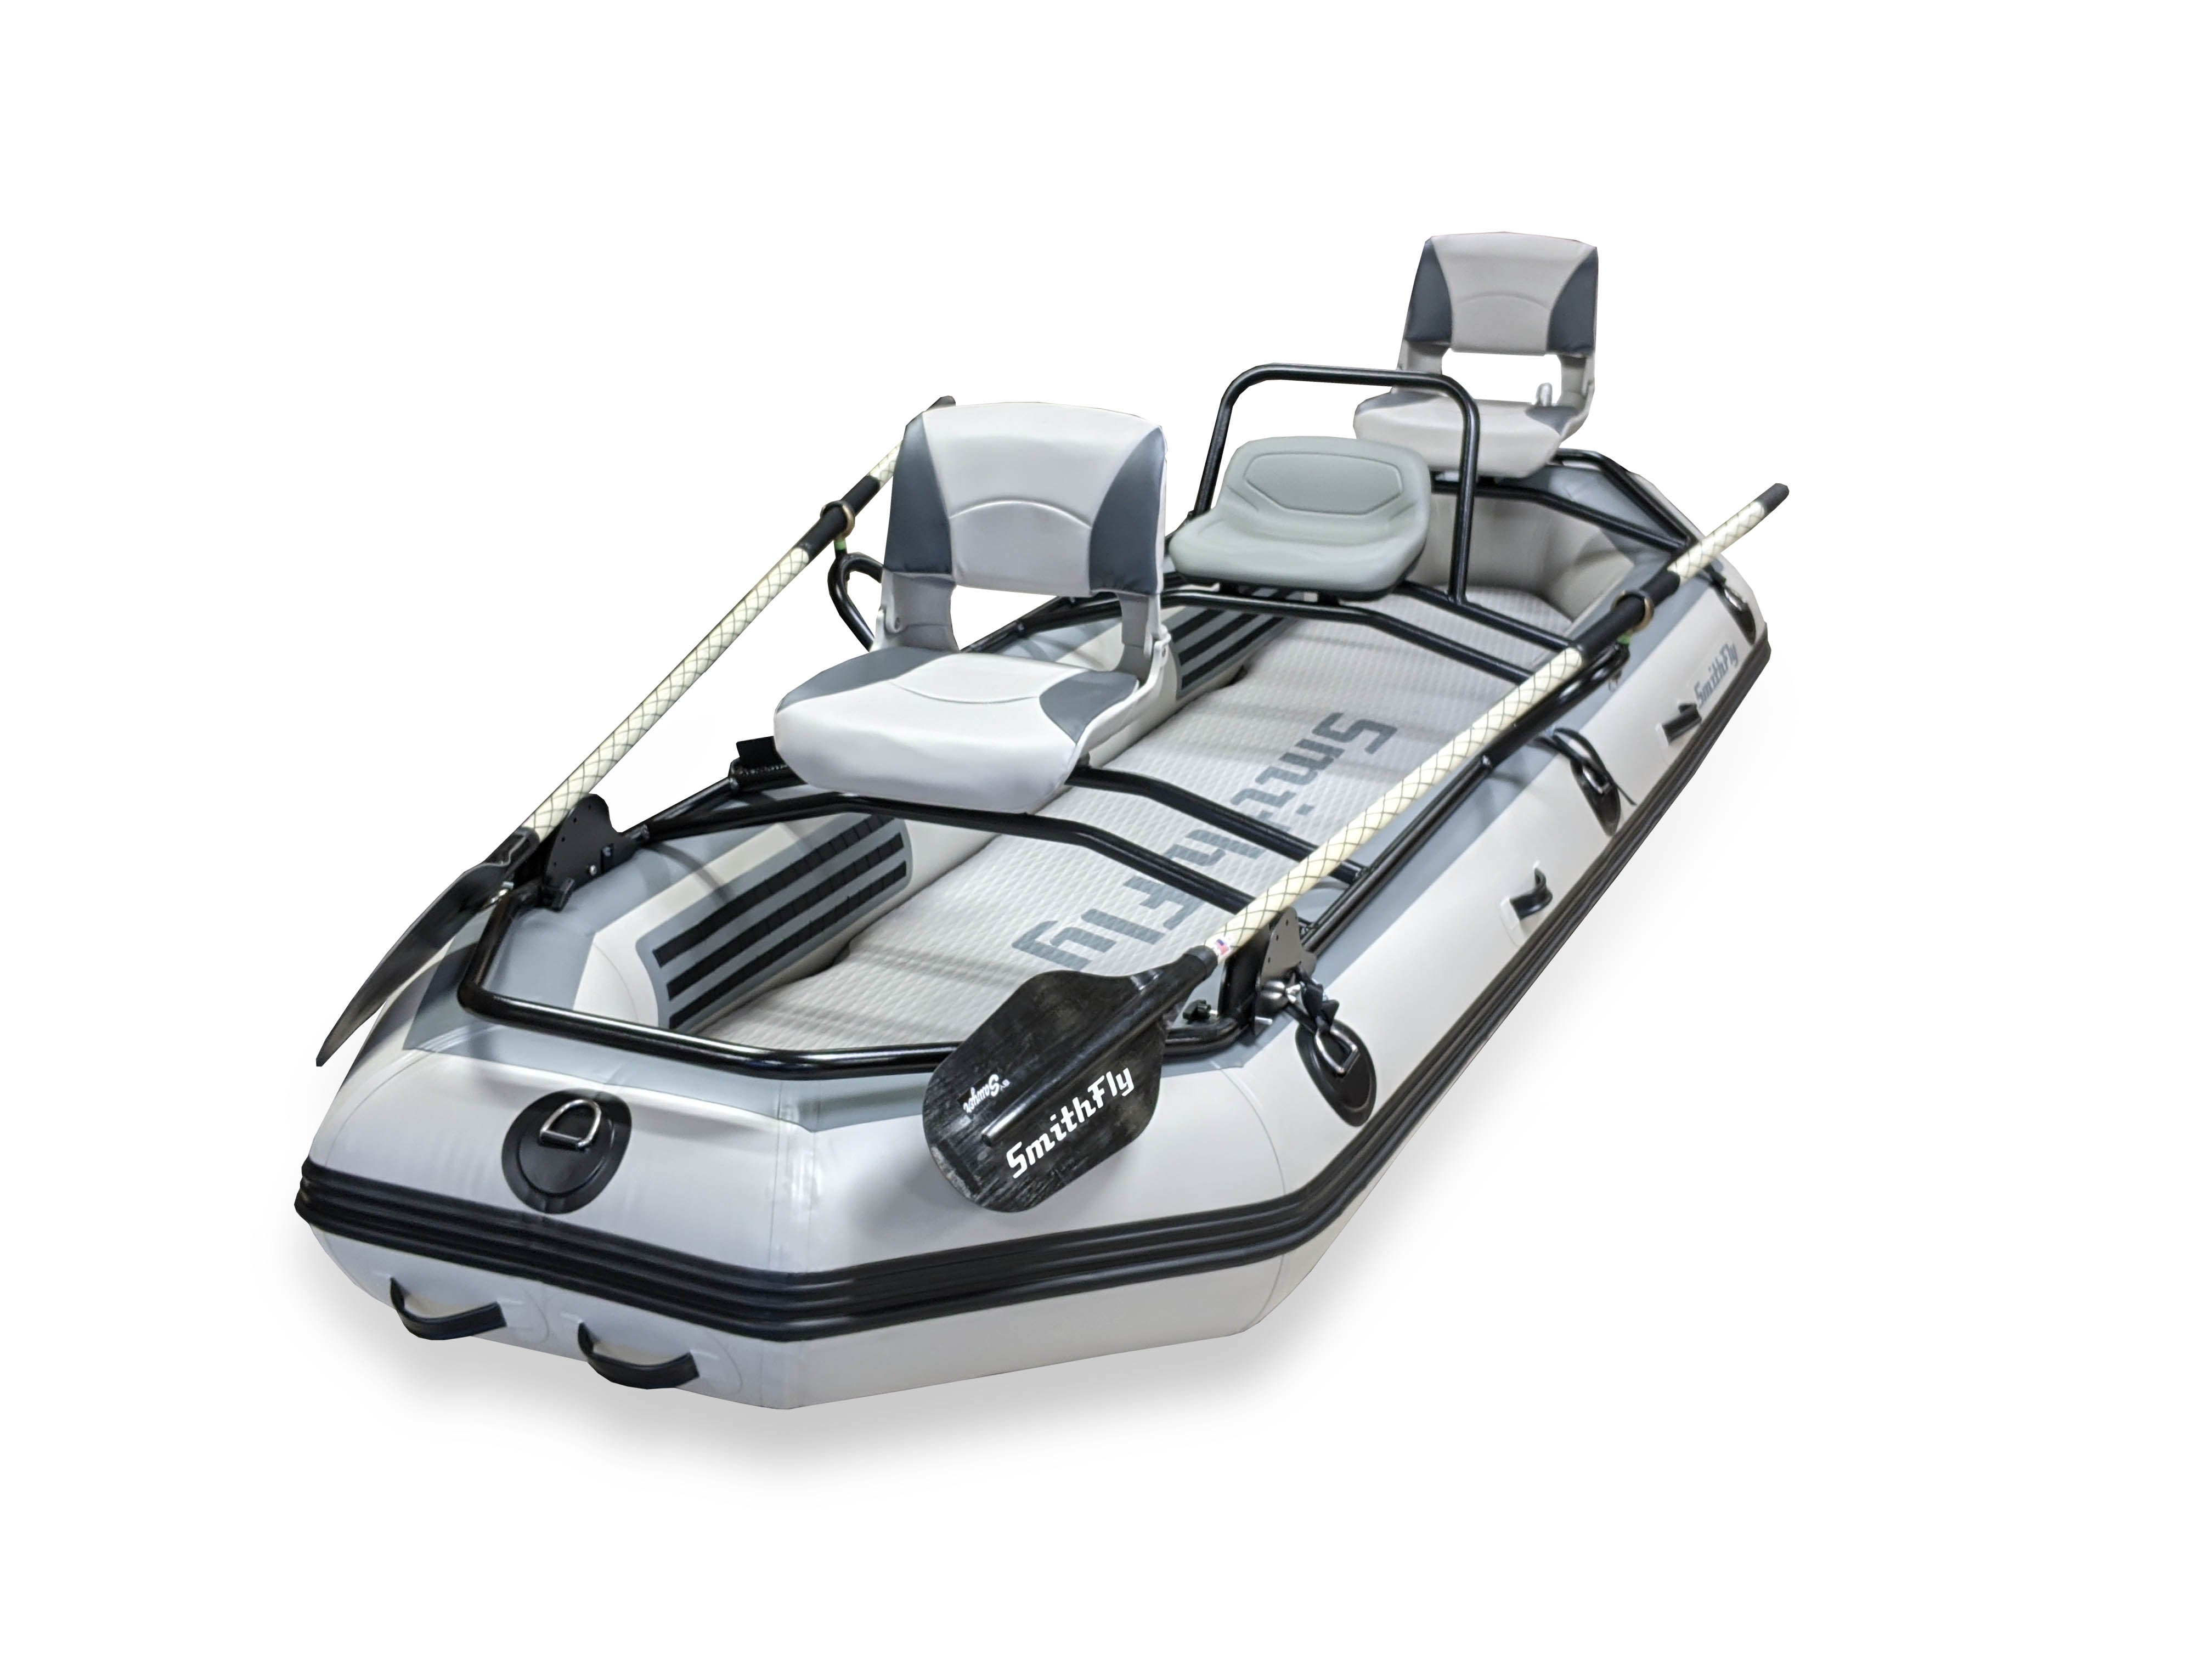 Inflatable Fishing Boat with Bench Seat, Rubber Boat for Fishing